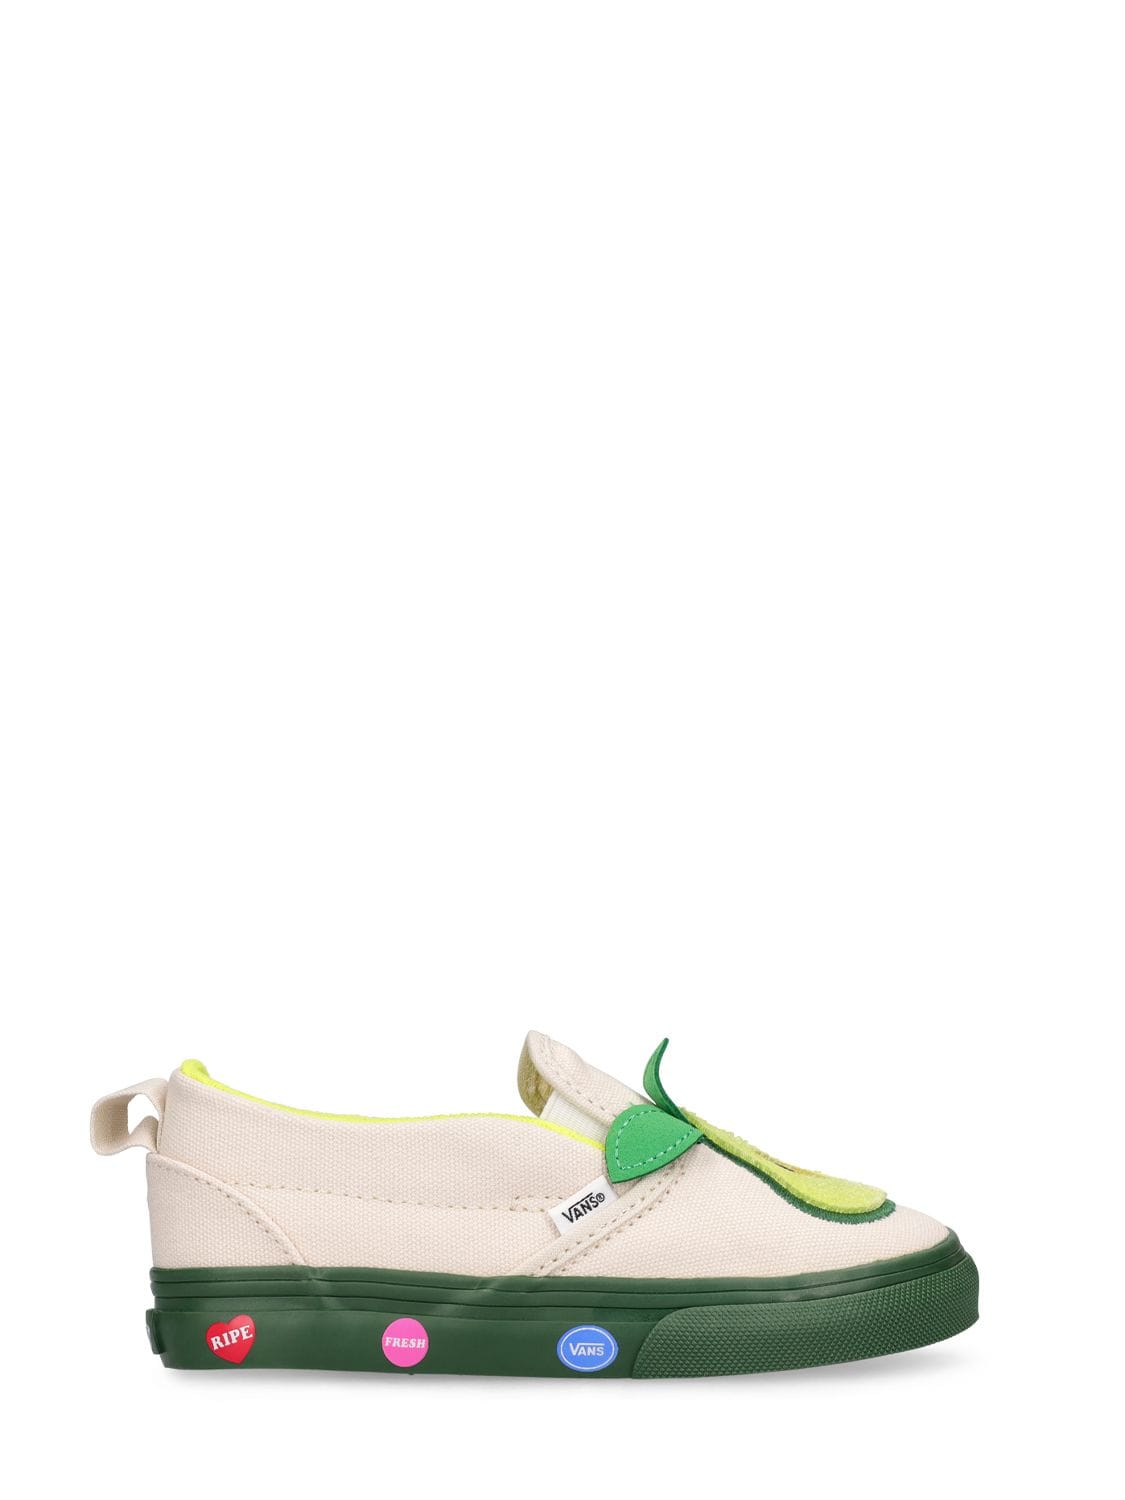 Image of Avocado Canvas Slip-on Sneakers